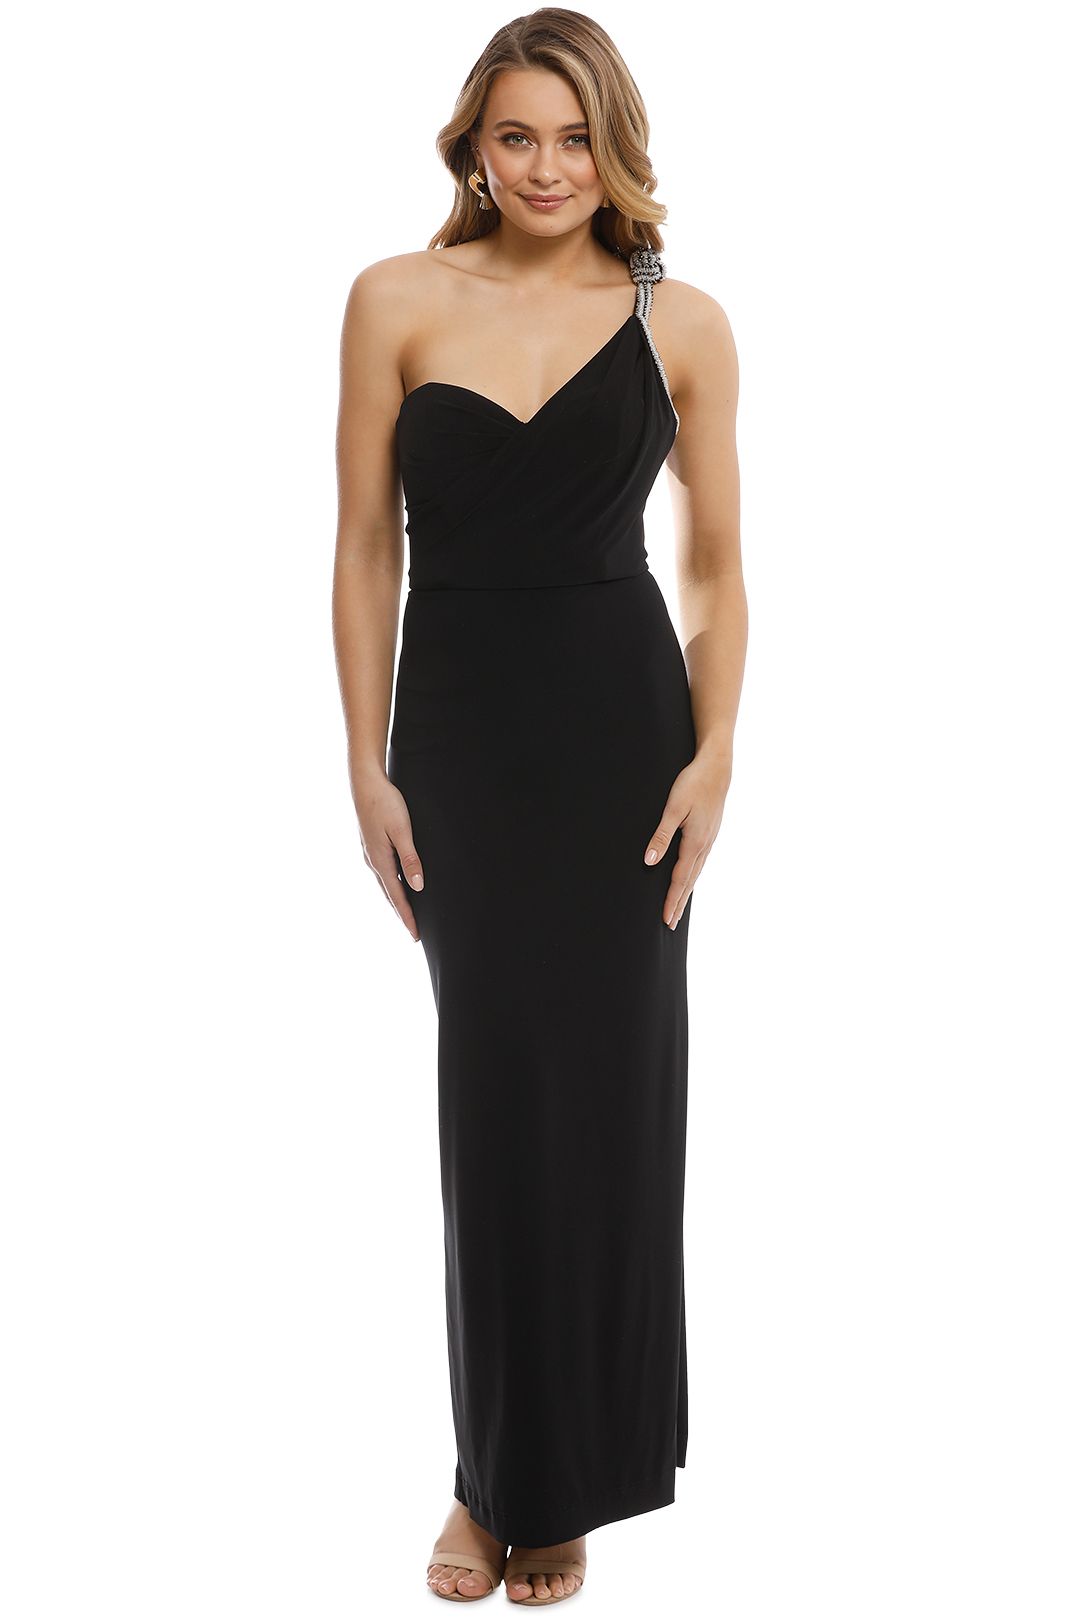 George - Xanthia Gown - Back - Front